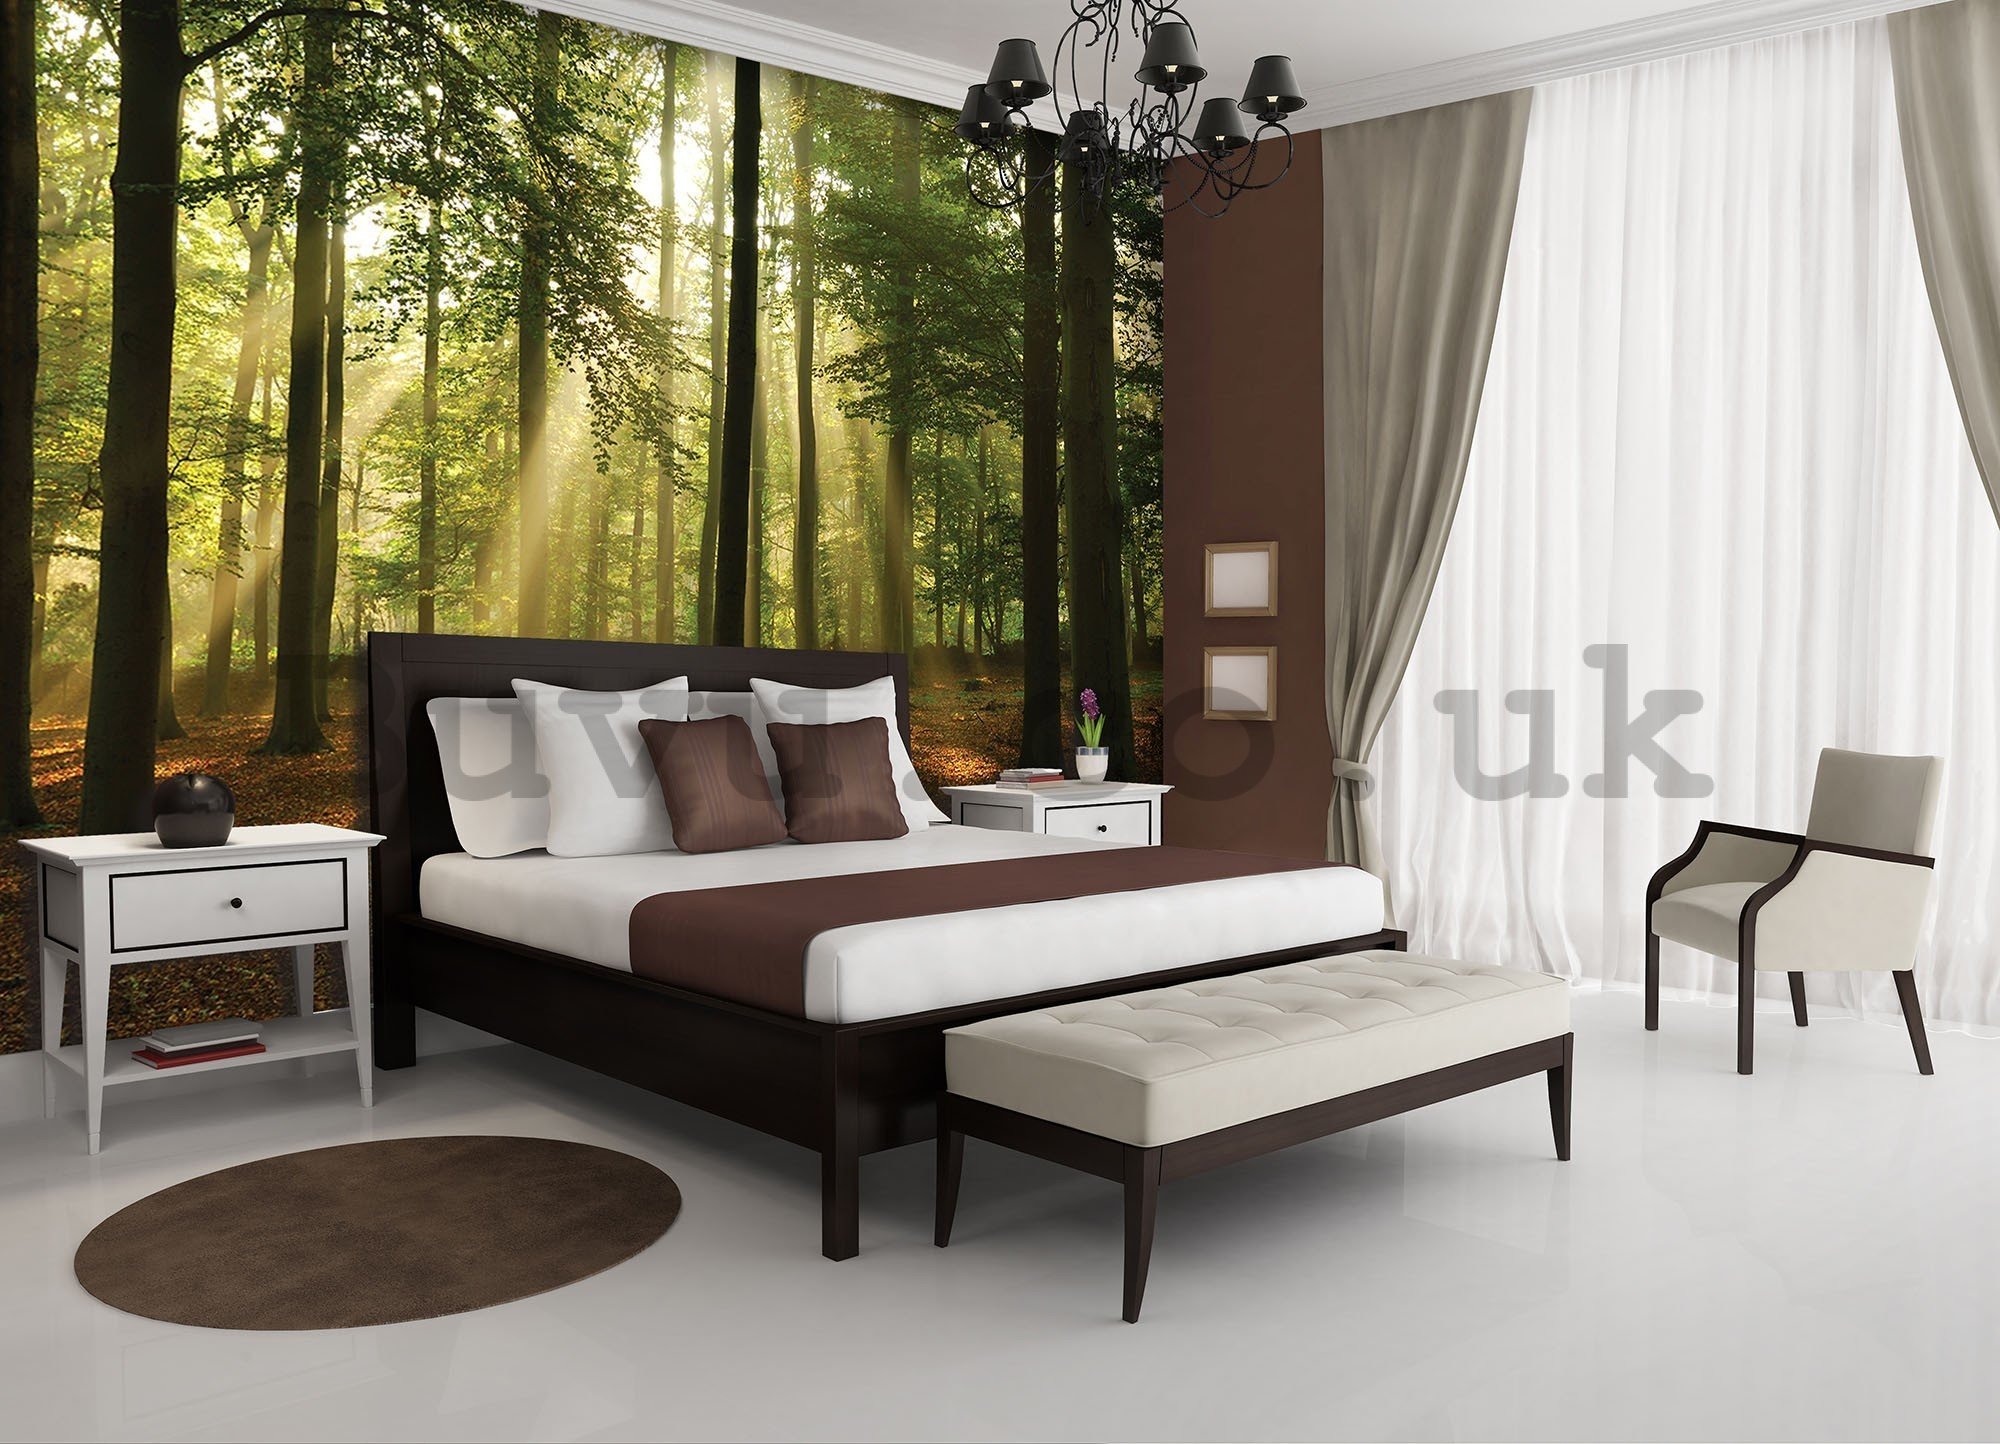 Wall mural vlies: Sun in the Forest (4) - 416x254 cm